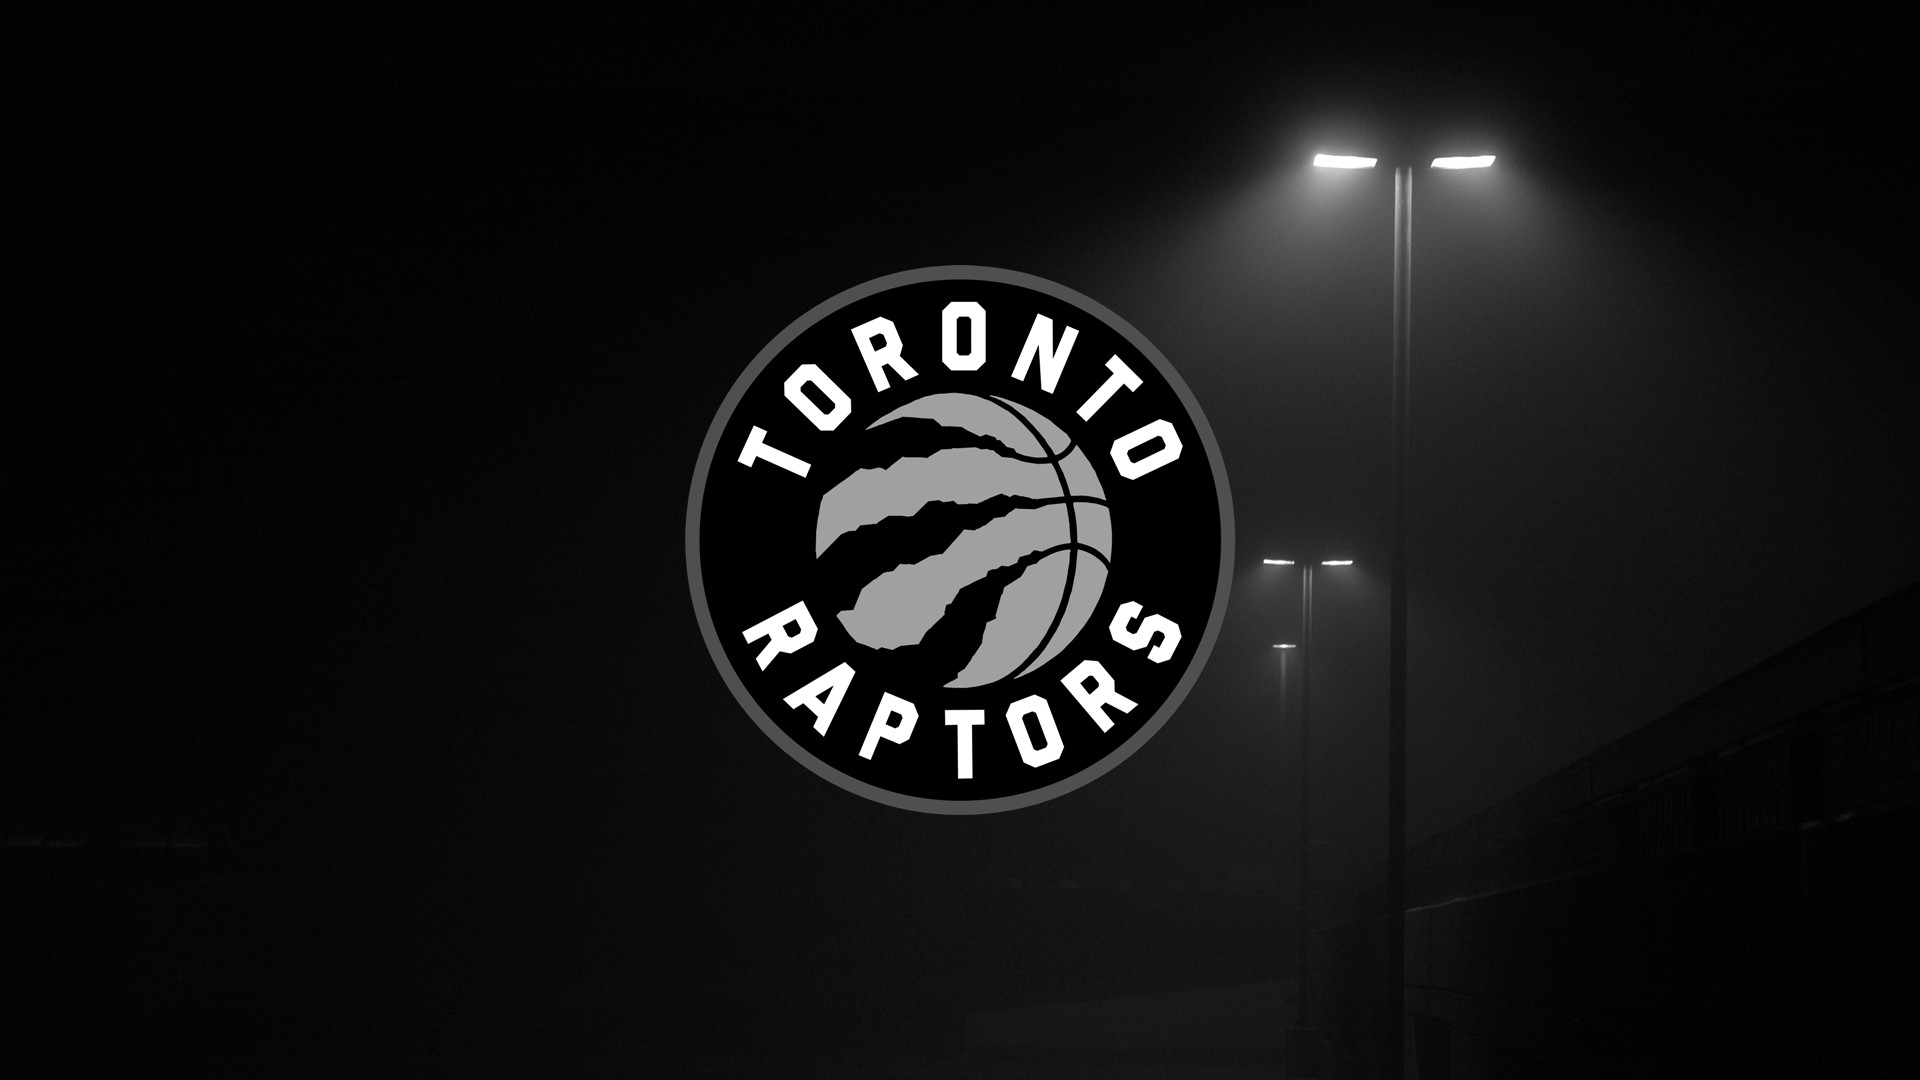 NBA Raptors HD Wallpapers with image dimensions 1920x1080 pixel. You can make this wallpaper for your Desktop Computer Backgrounds, Windows or Mac Screensavers, iPhone Lock screen, Tablet or Android and another Mobile Phone device